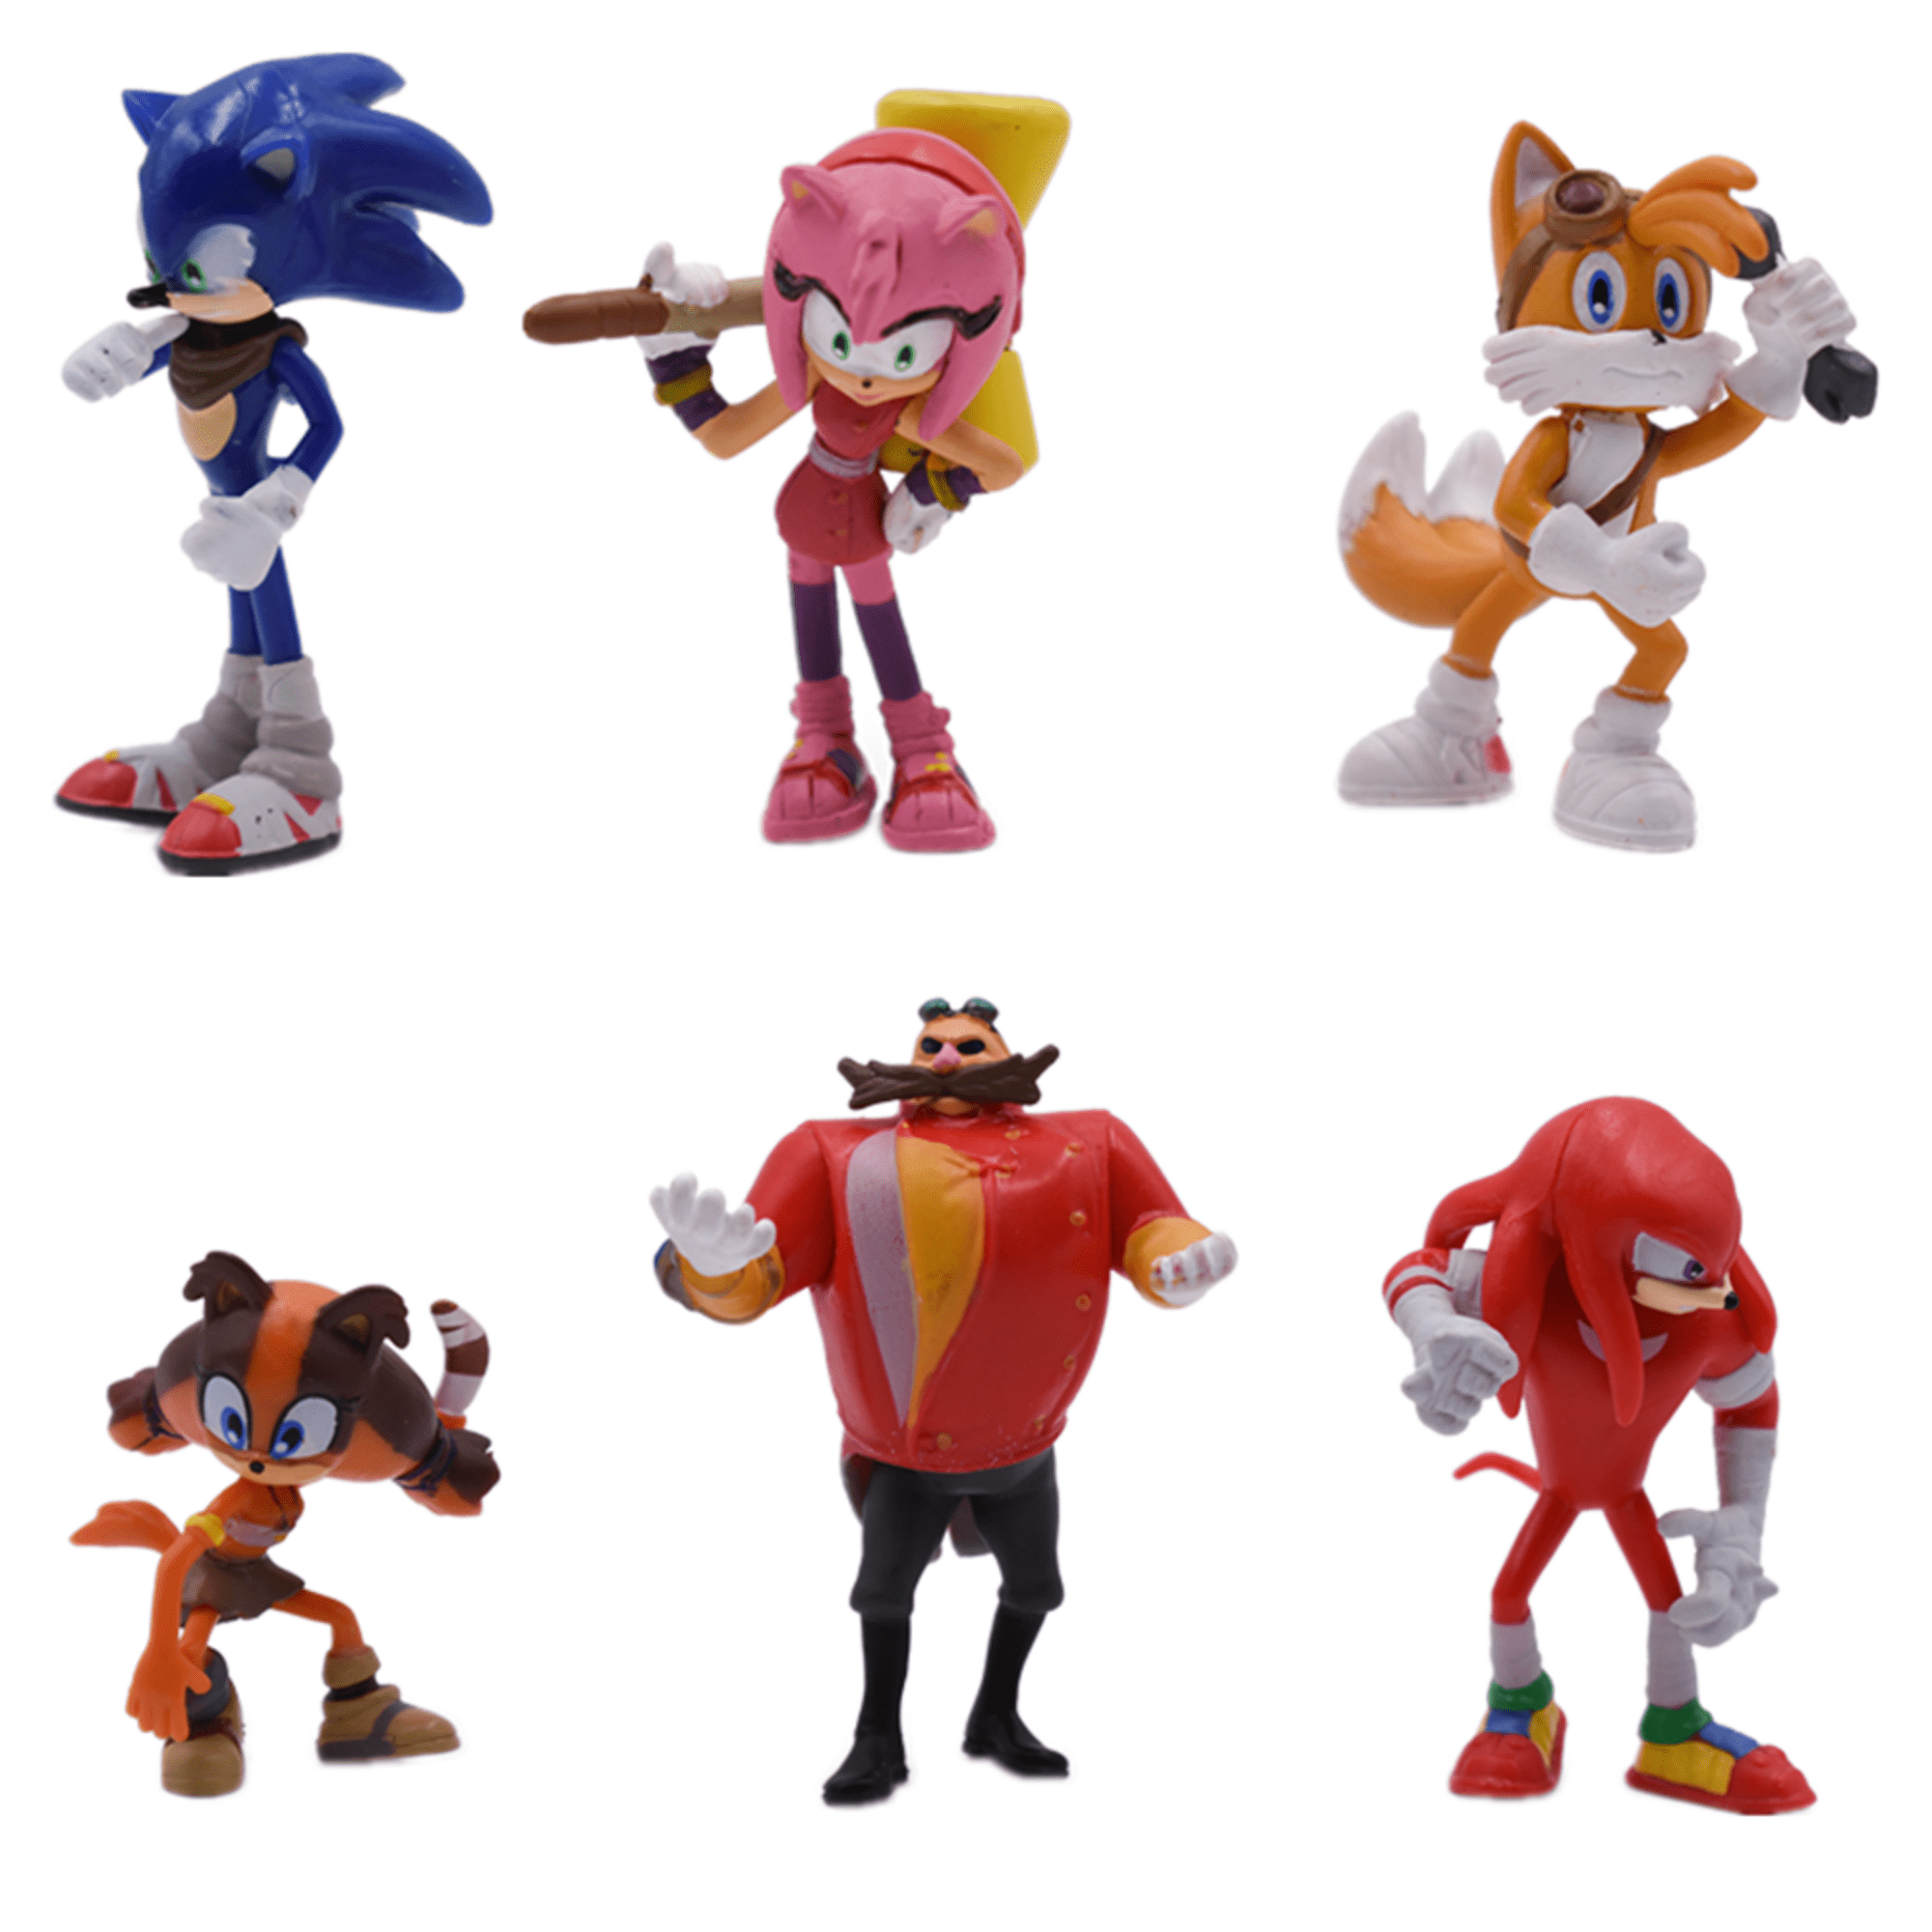 6Pcs Sonic Action Figures Cake Toppers Collection and Decoration Play Sets for Boys Great Gifts with 2.6inches Tall Hedgehog Figures Characters Toys 